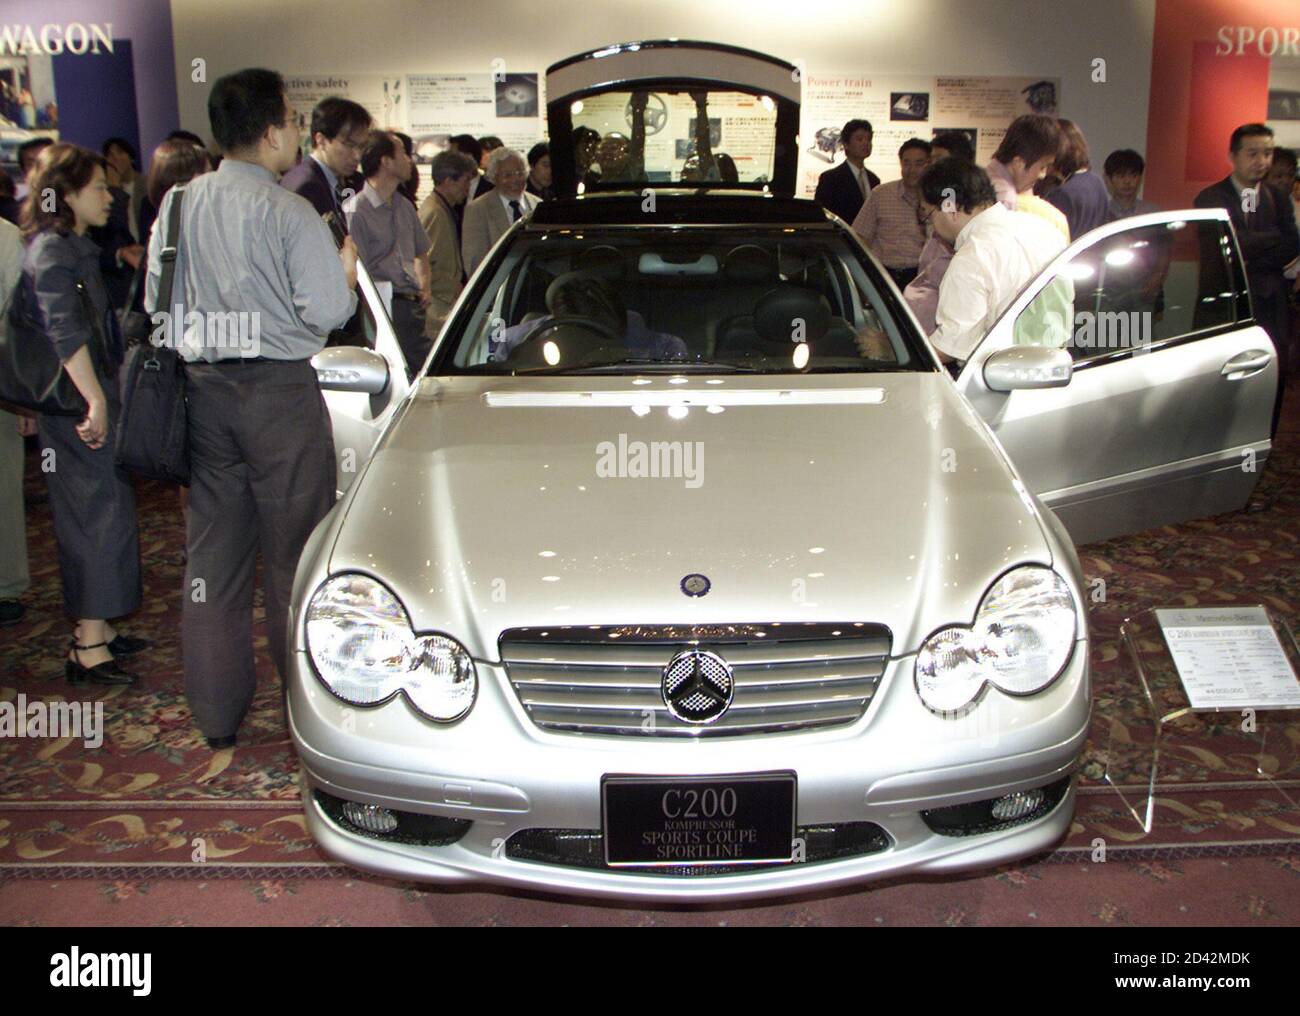 Japanese motor journalists crowd around the new Mercedes-Benz C-Class C200  Kompressor Sports Coupe Sportline in Tokyo June 26, 2001. DaimlerChrysler  Japan Co launched this new model in Japan on Tuesday, priced at